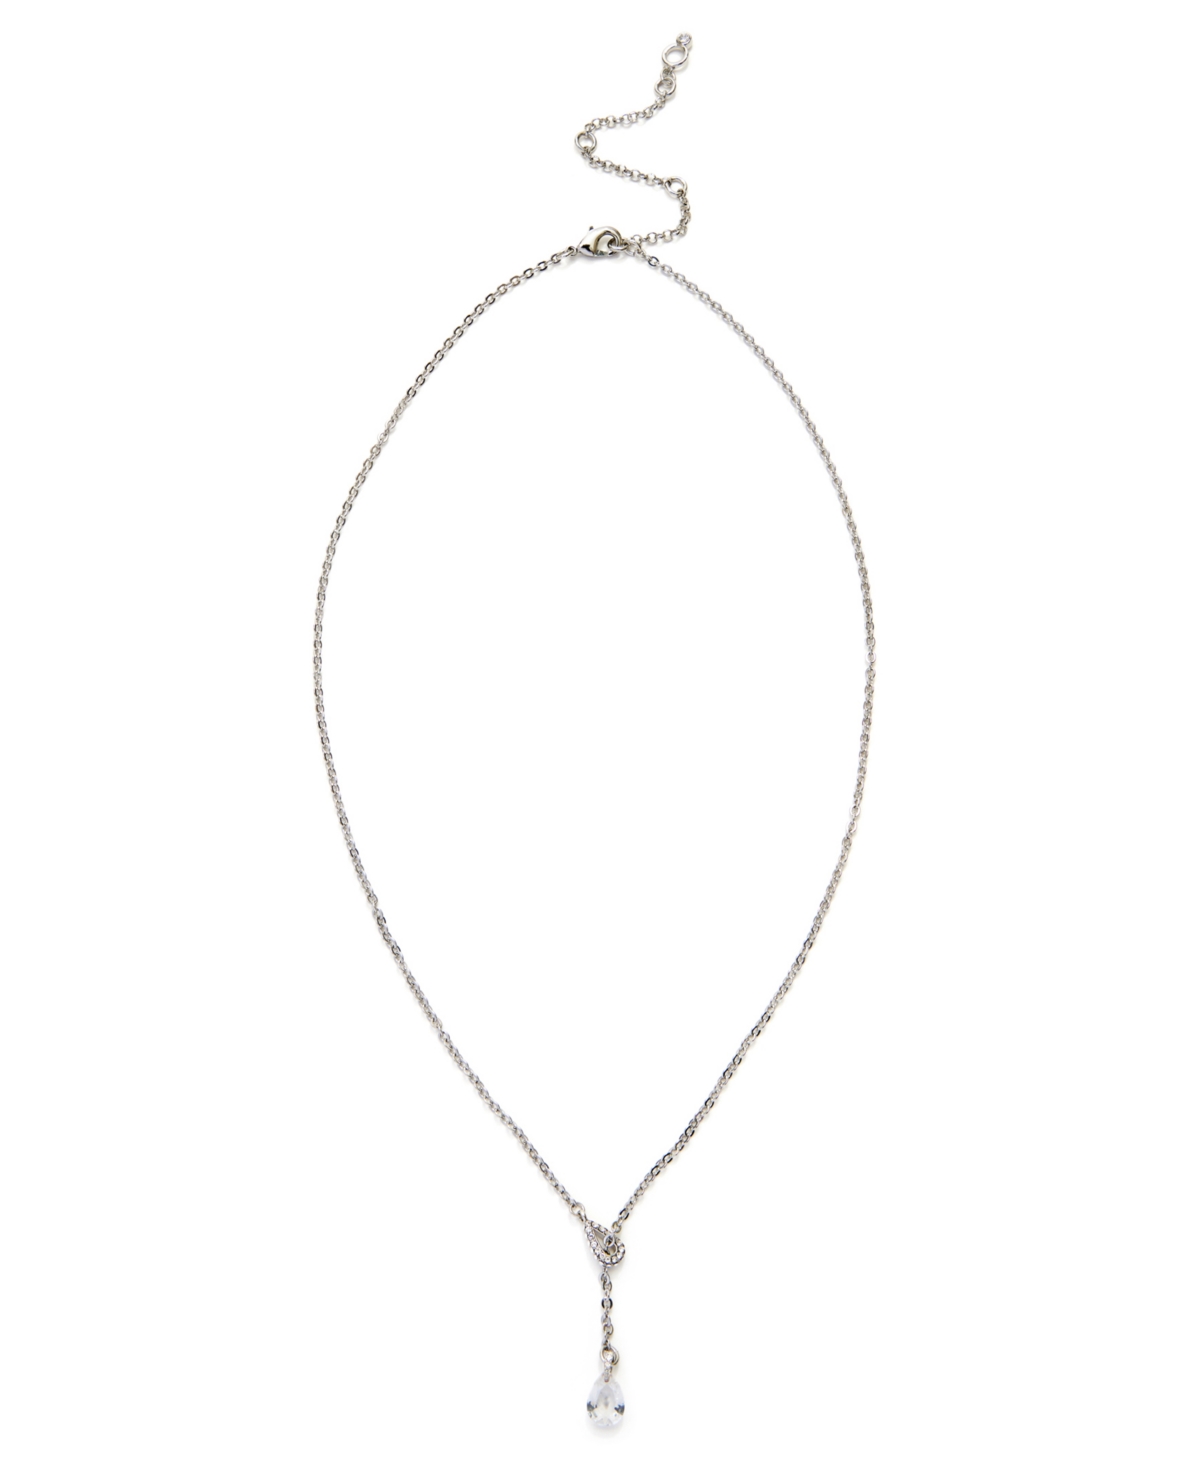 Faux Stone Pave Prism Lariat Necklace - Crystal, Rhodium